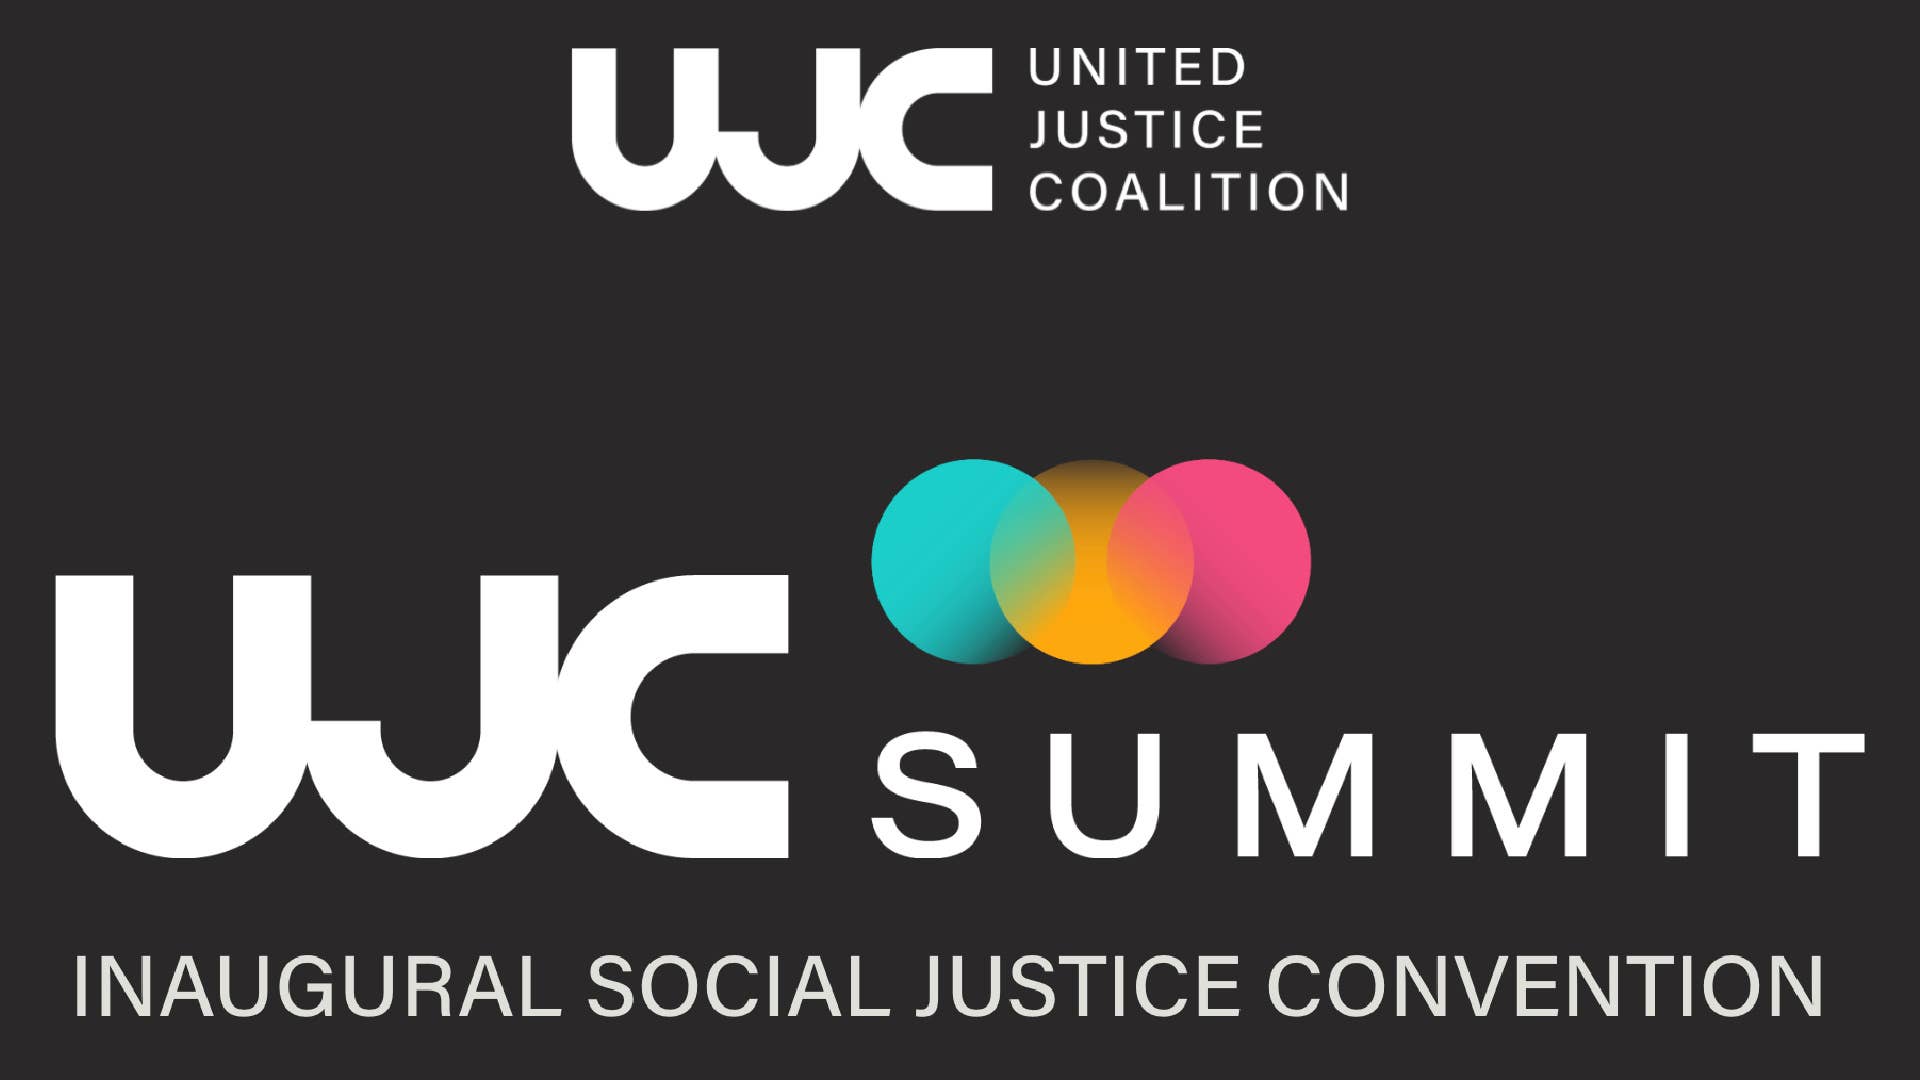 United Justice Coalition inaugural social justice convention